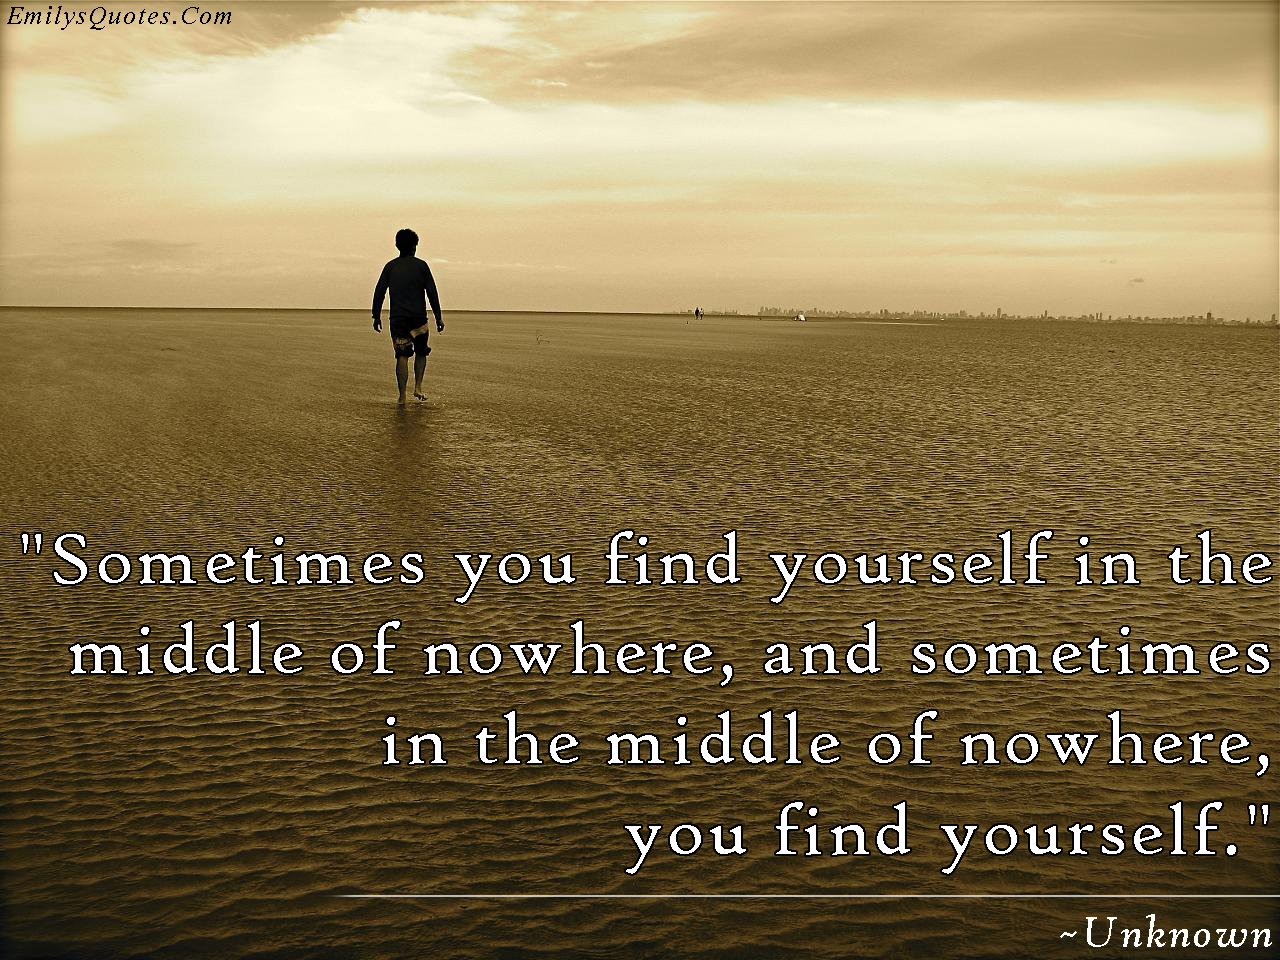 Sometimes you find yourself in the middle of nowhere, and sometimes in the middle of nowhere, you find yourself